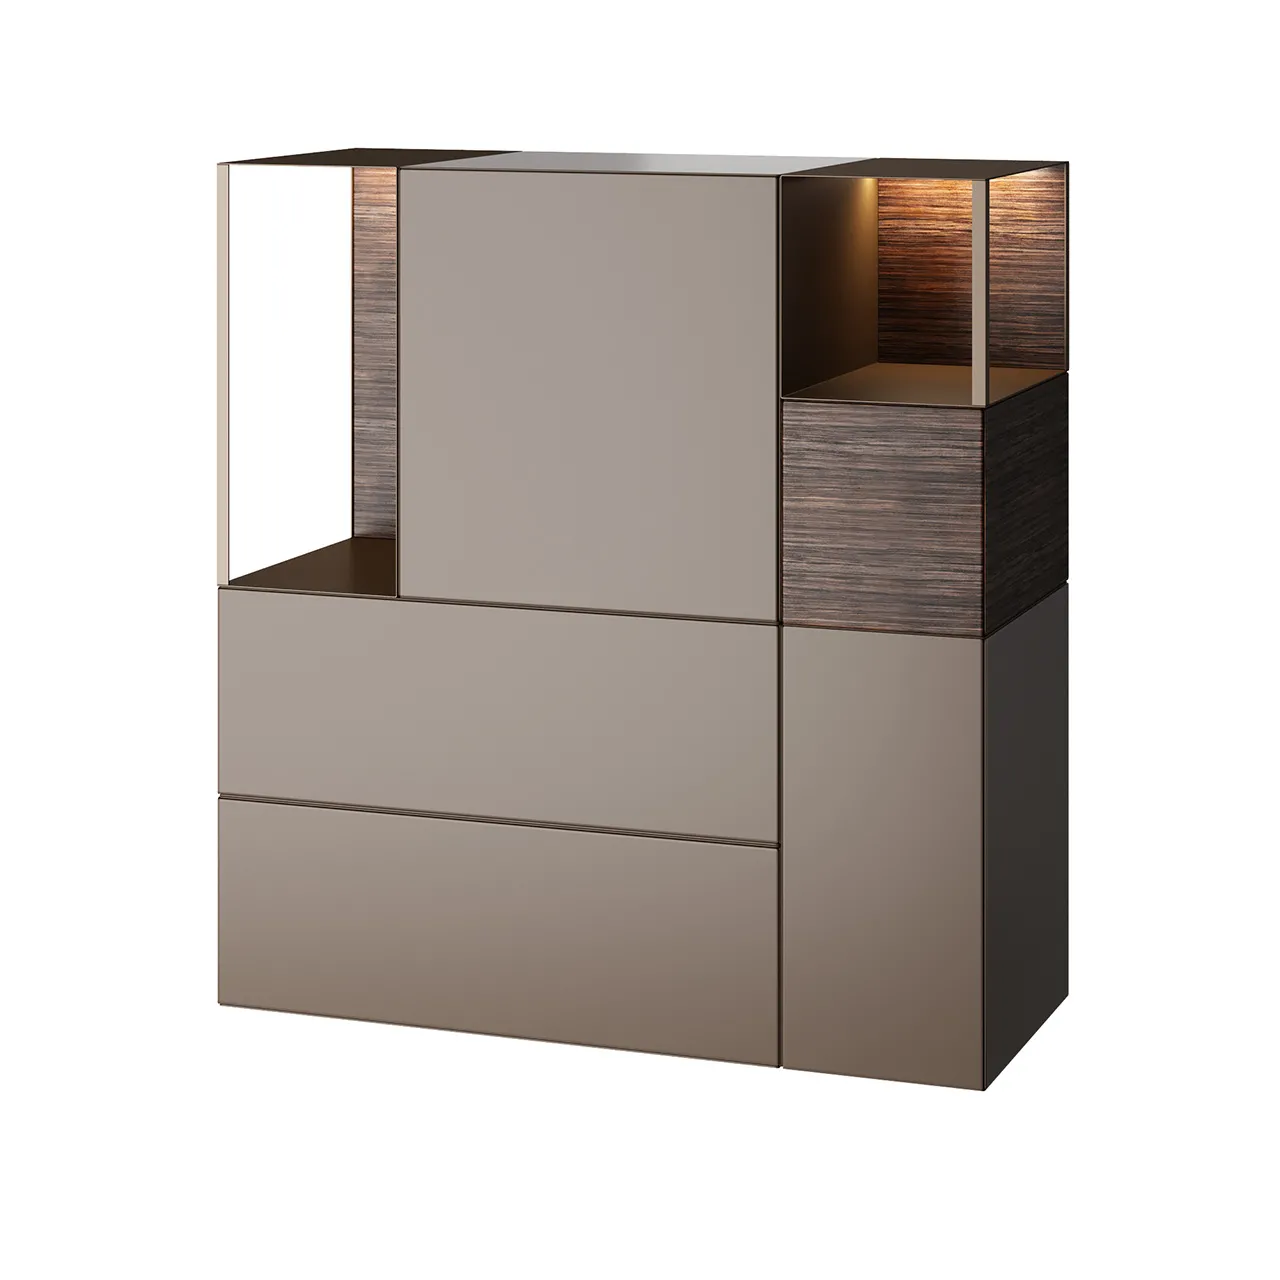 Furniture – avenue-highboard-cabinet-04-rl-by-md-house